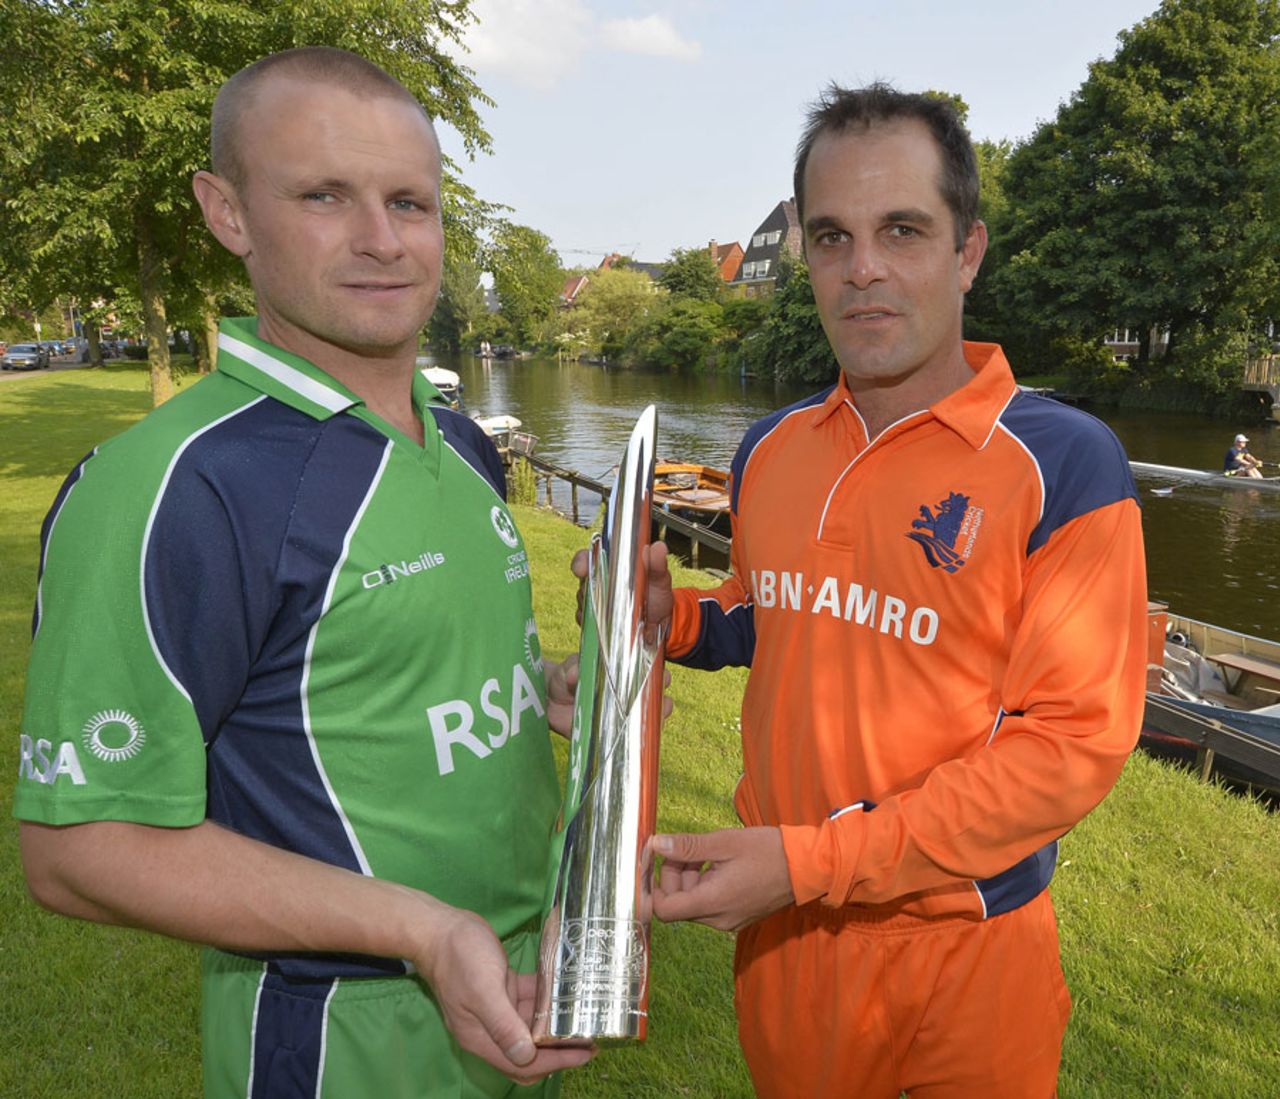 William Porterfield and Peter Borren with the ICC World Cricket League Championship Trophy, Amsterdam, July 6, 2013